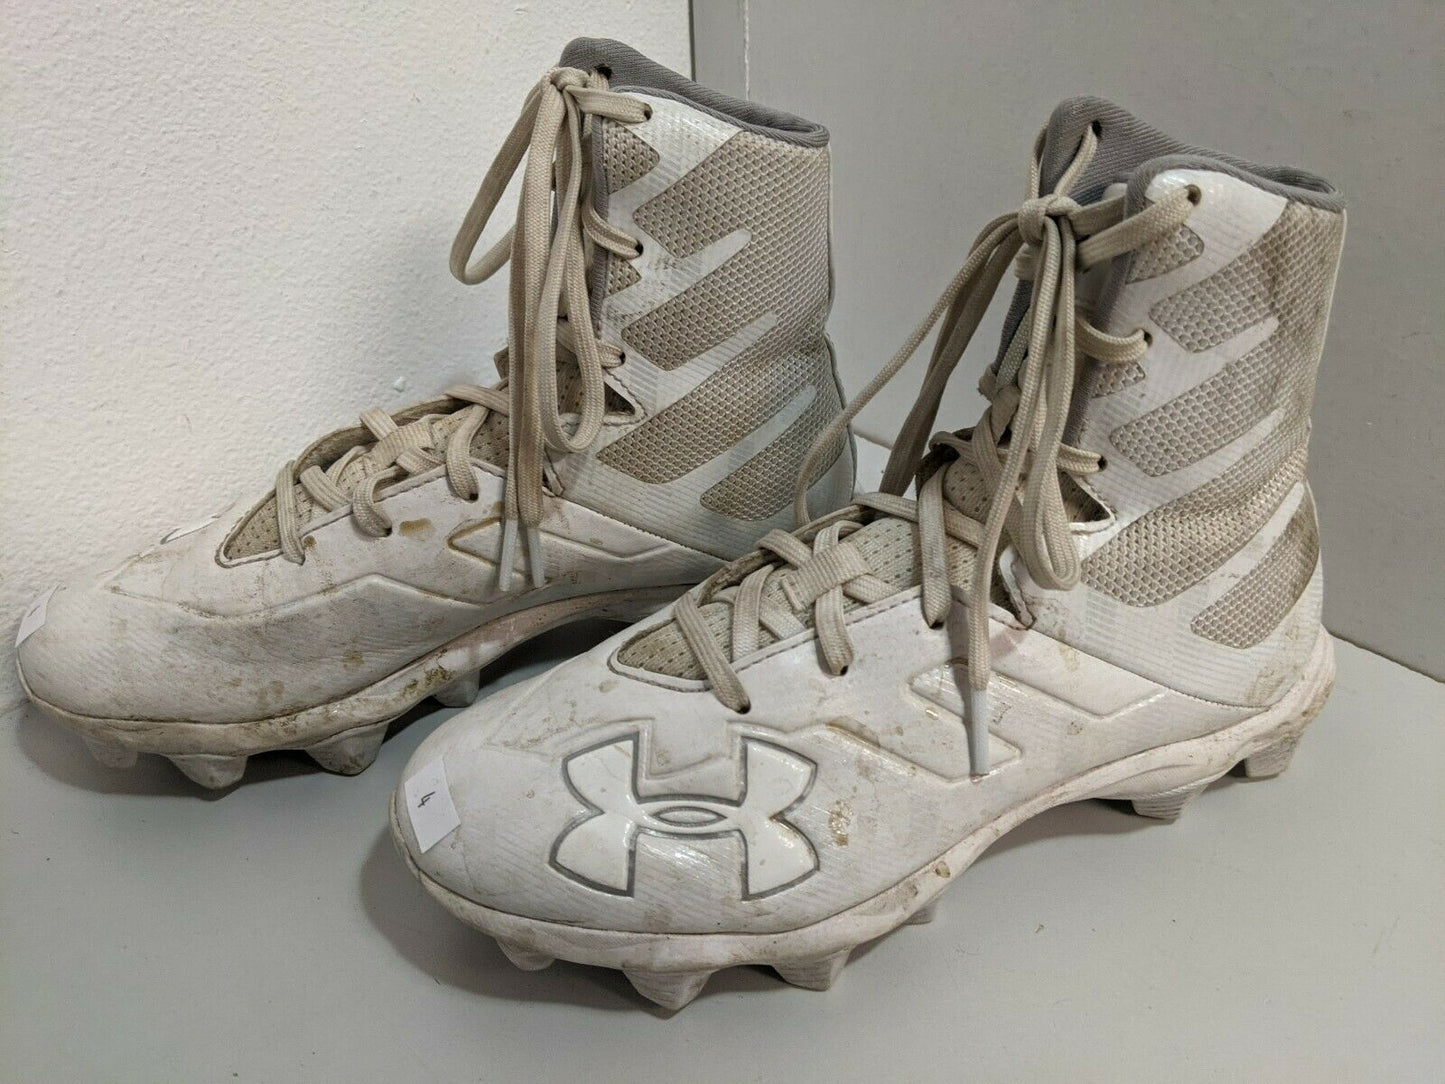 Under Armor Highlight Cleats Size 4 Color White